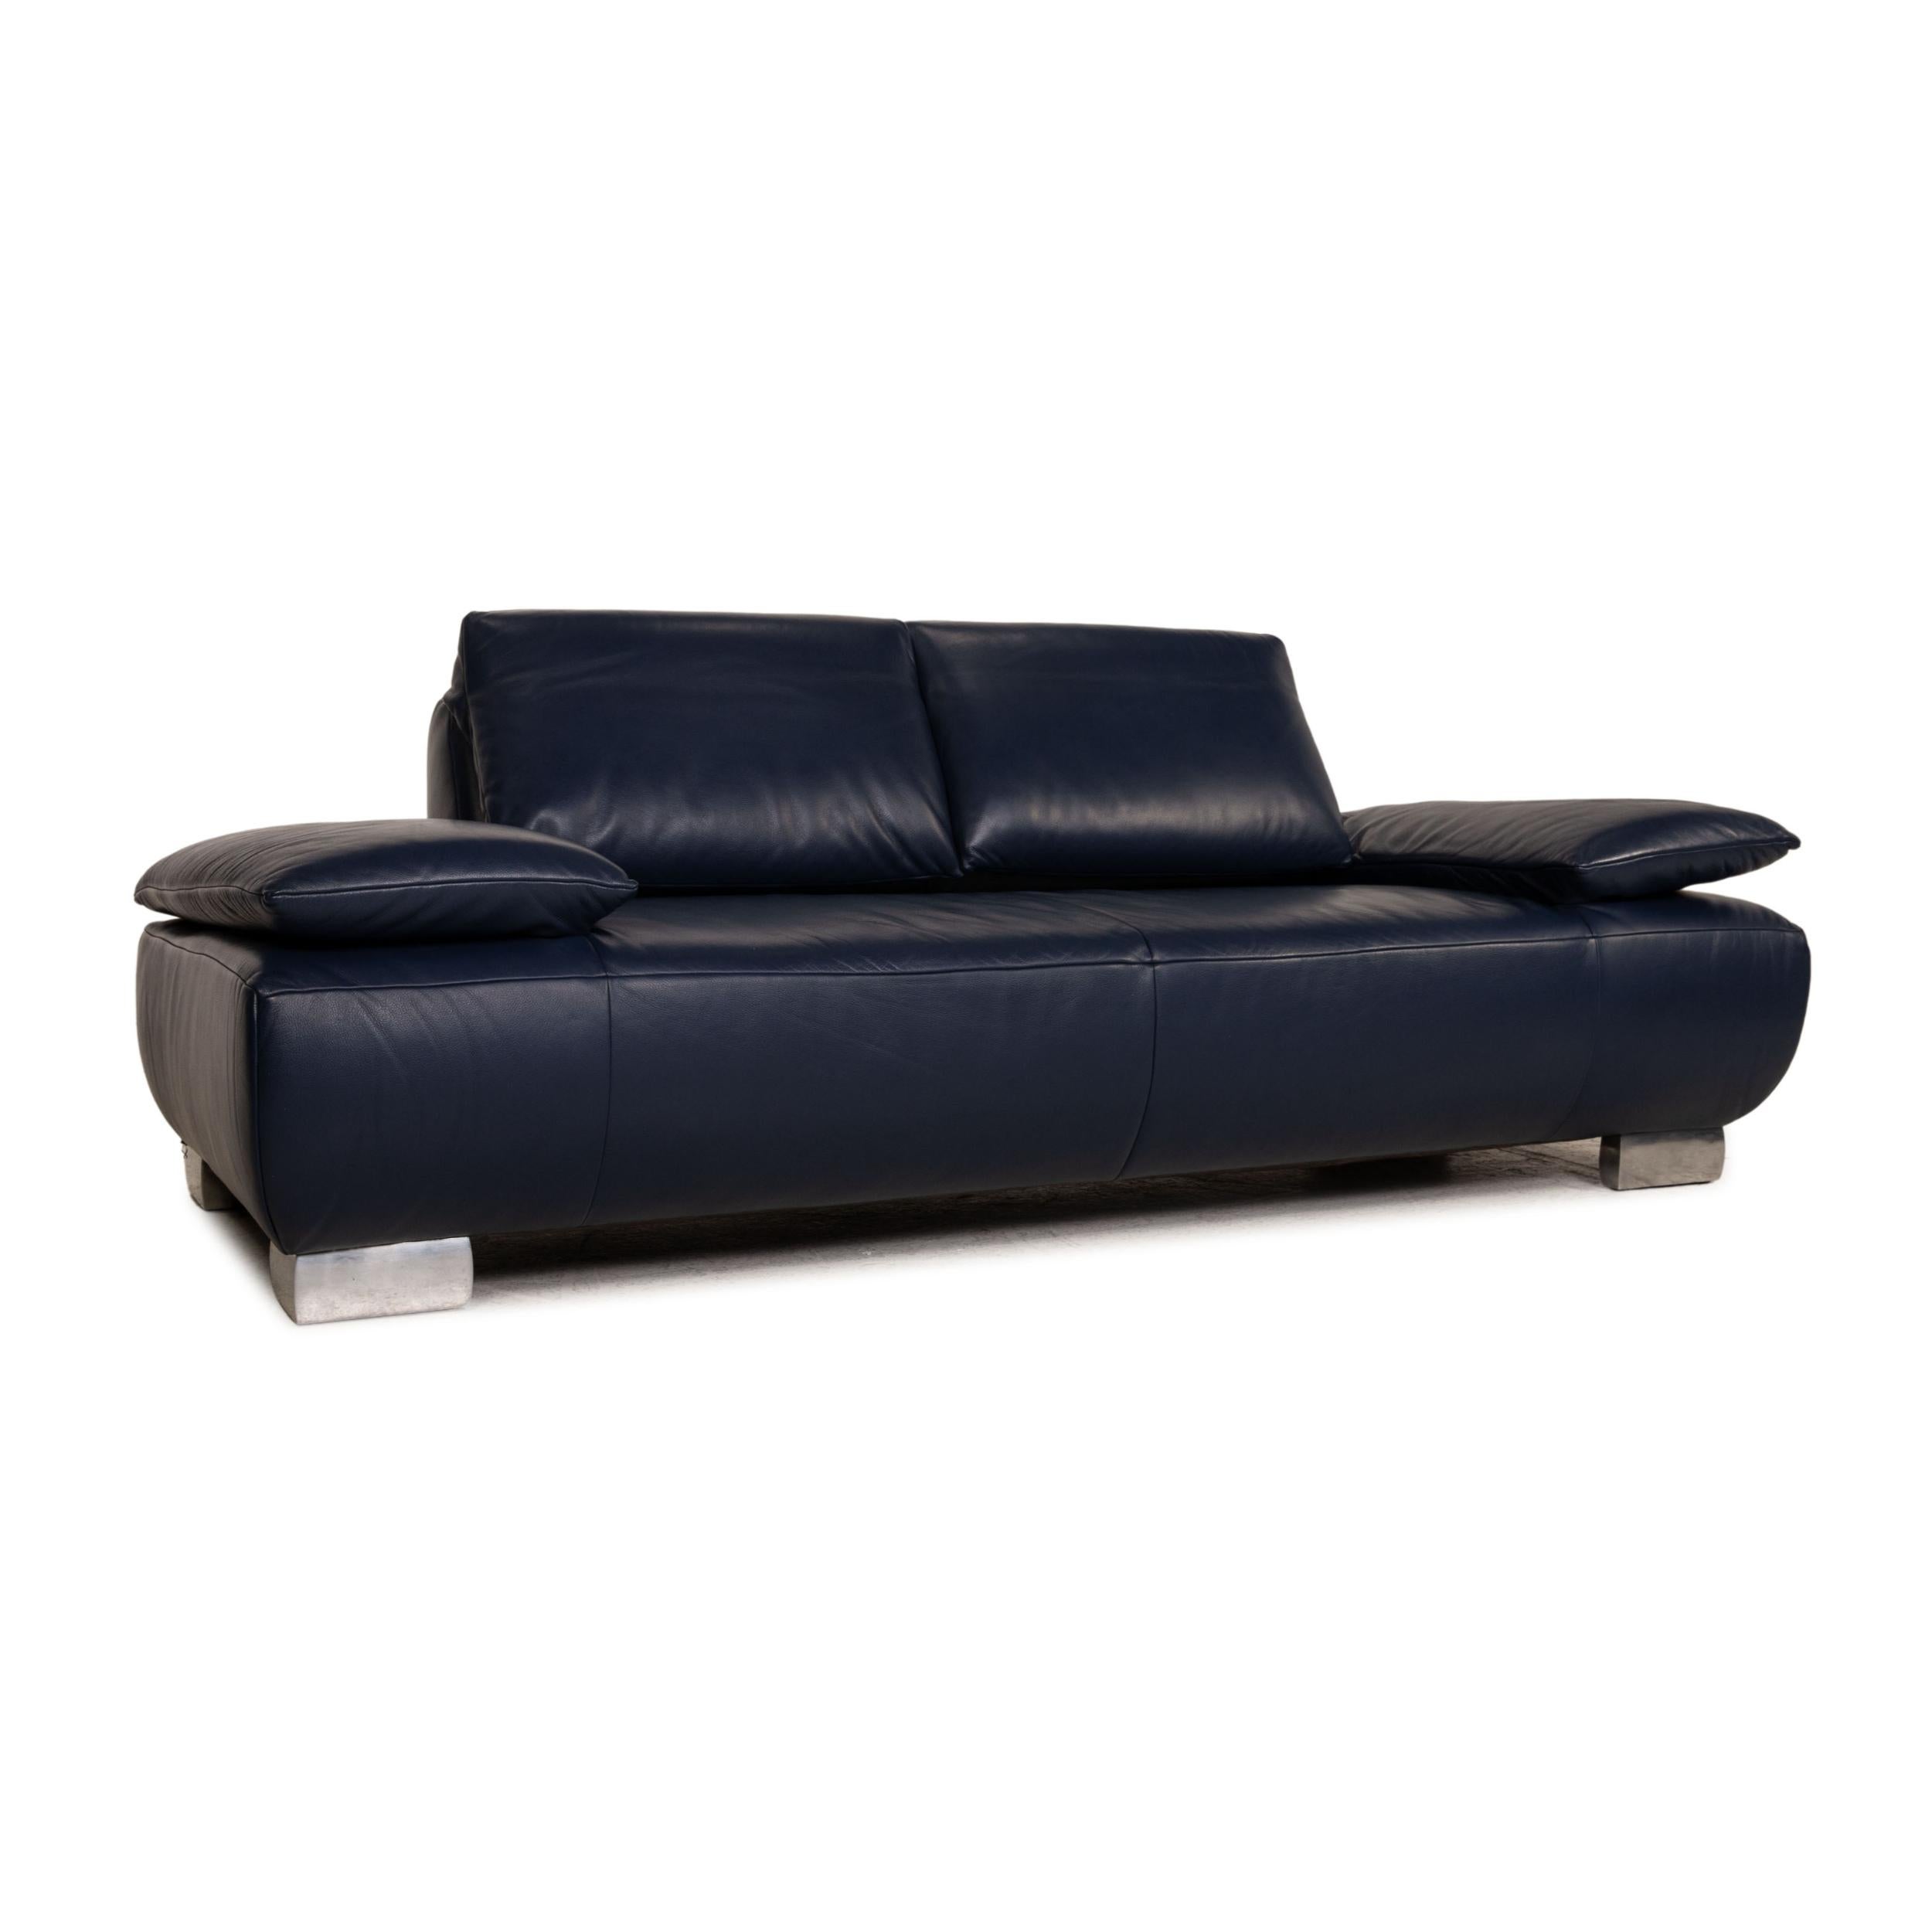 Koinor Volare Leather Sofa Blue Two Seater Couch Function In Good Condition For Sale In Cologne, DE